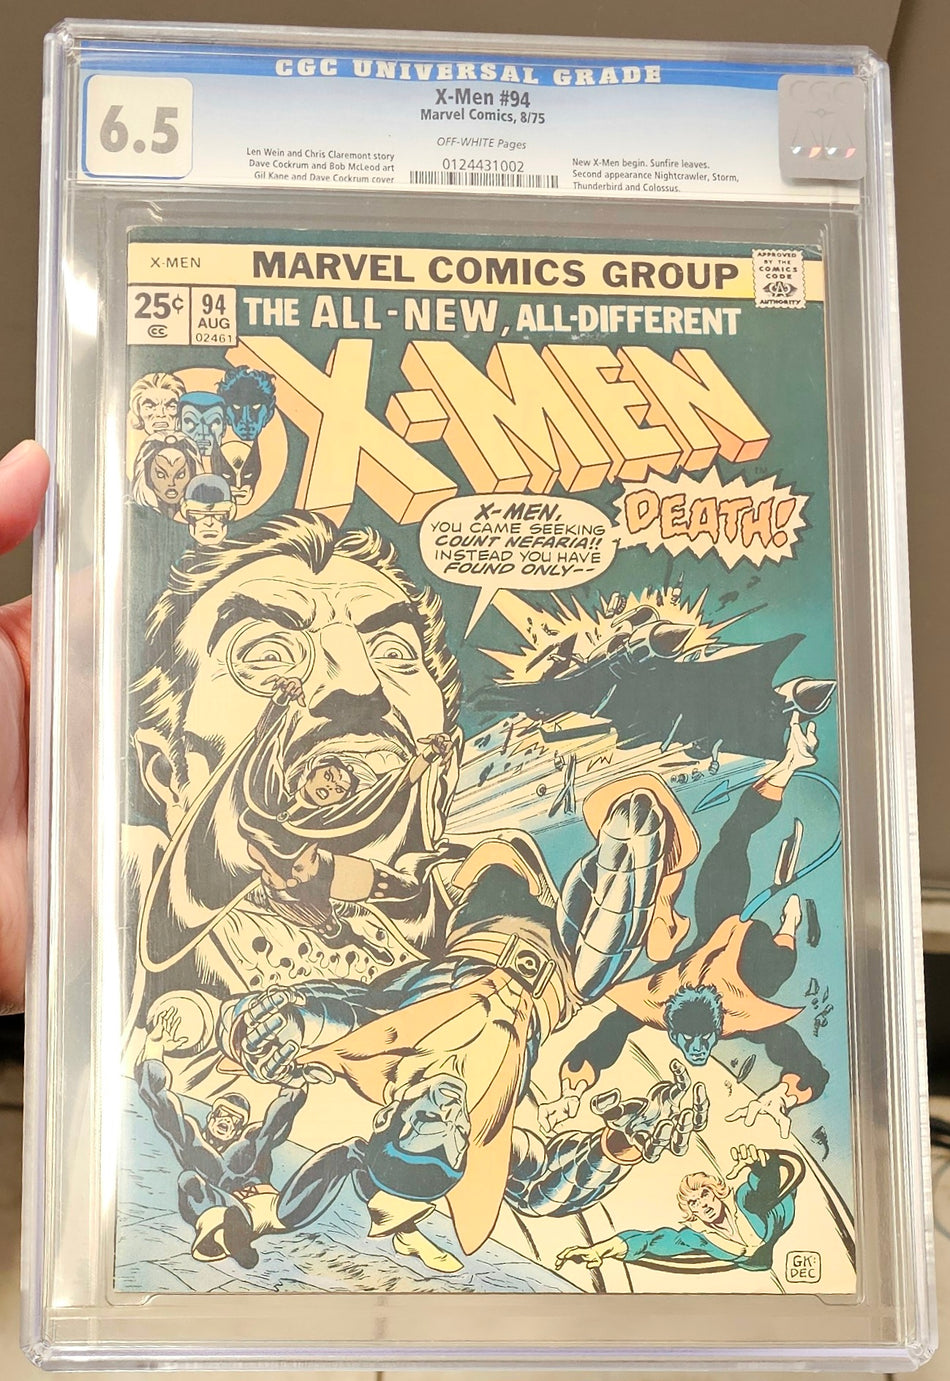 X-Men #94 (1975) CGC 6.5 (New X-Men begin Sunfire leaves, Second 2nd Appearance Nightcrawler, Storm, Thunderbird and Colossus)